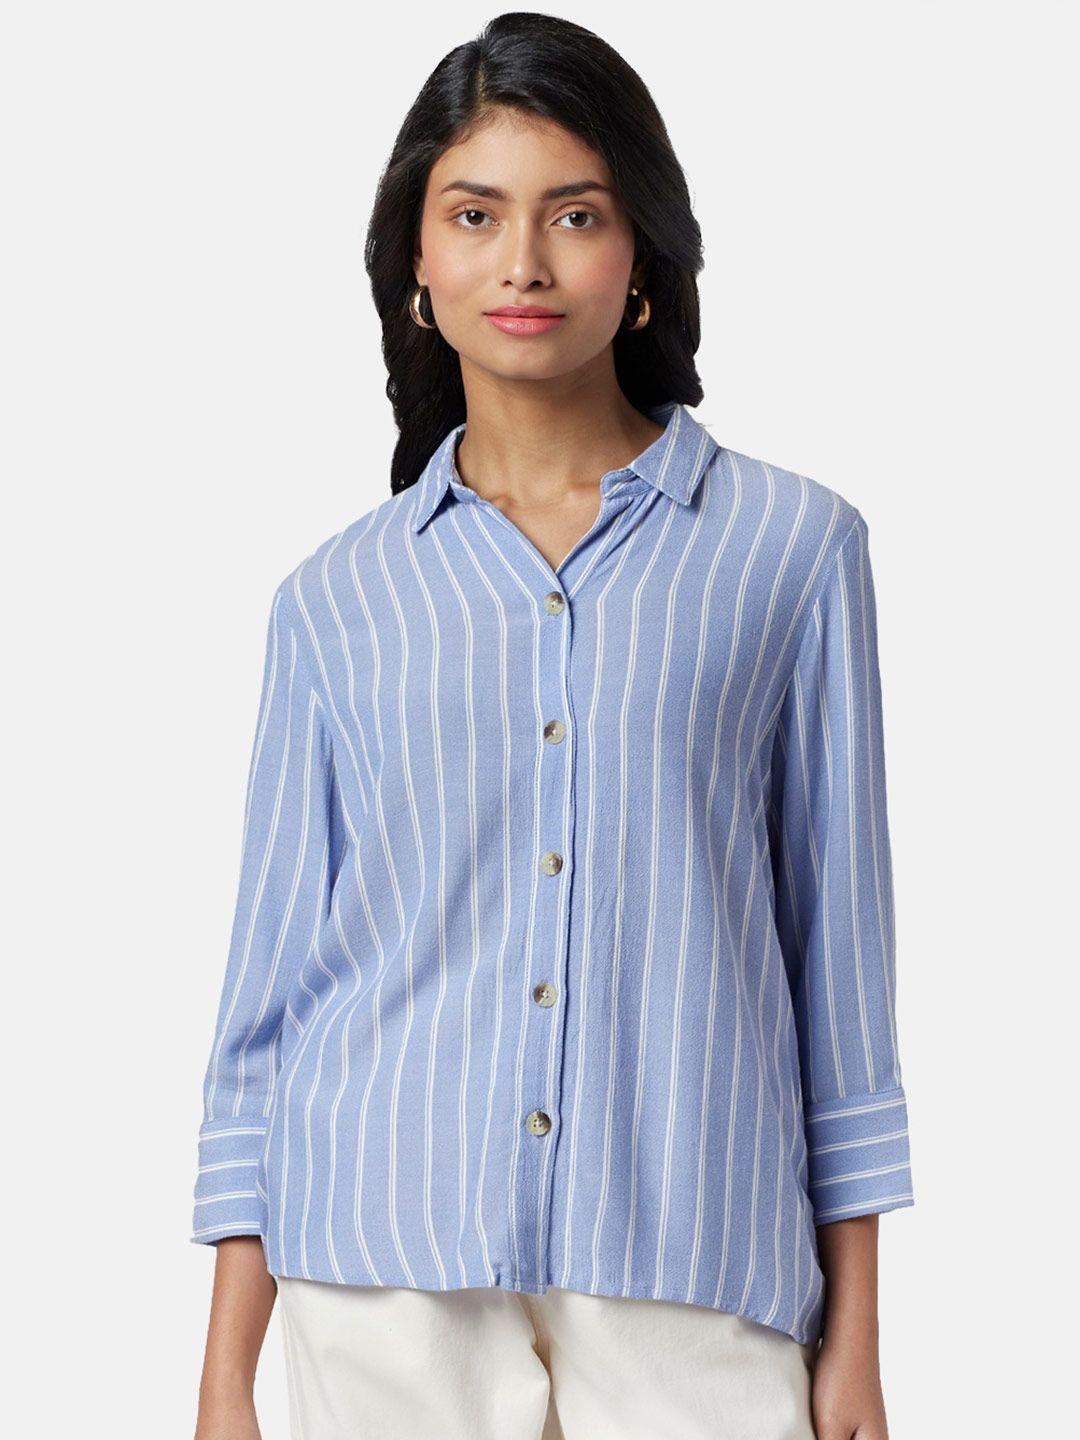 honey-by-pantaloons-striped-shirt-style-top